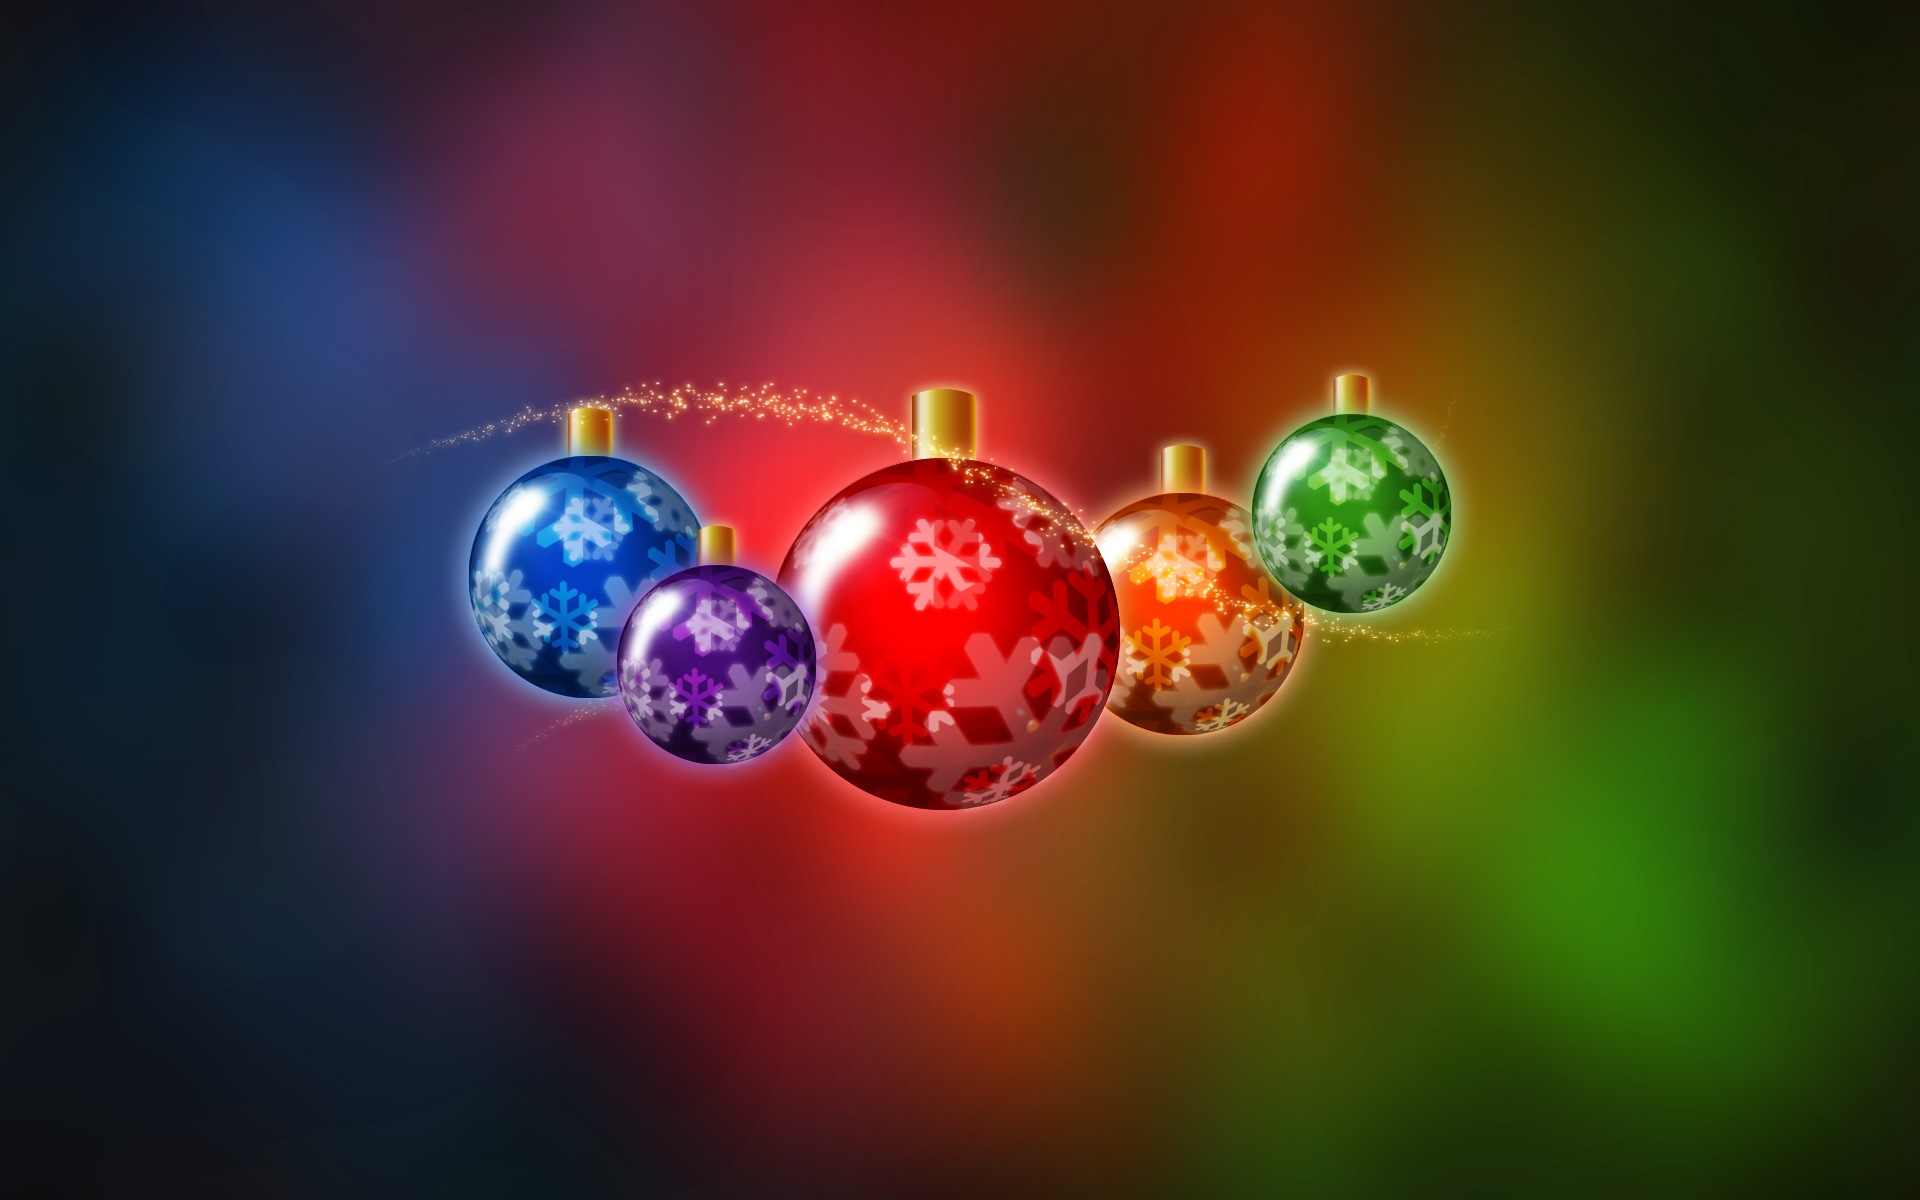 Christmas Wallpaper Widescreen 10998 Hd Wallpapers in Celebrations